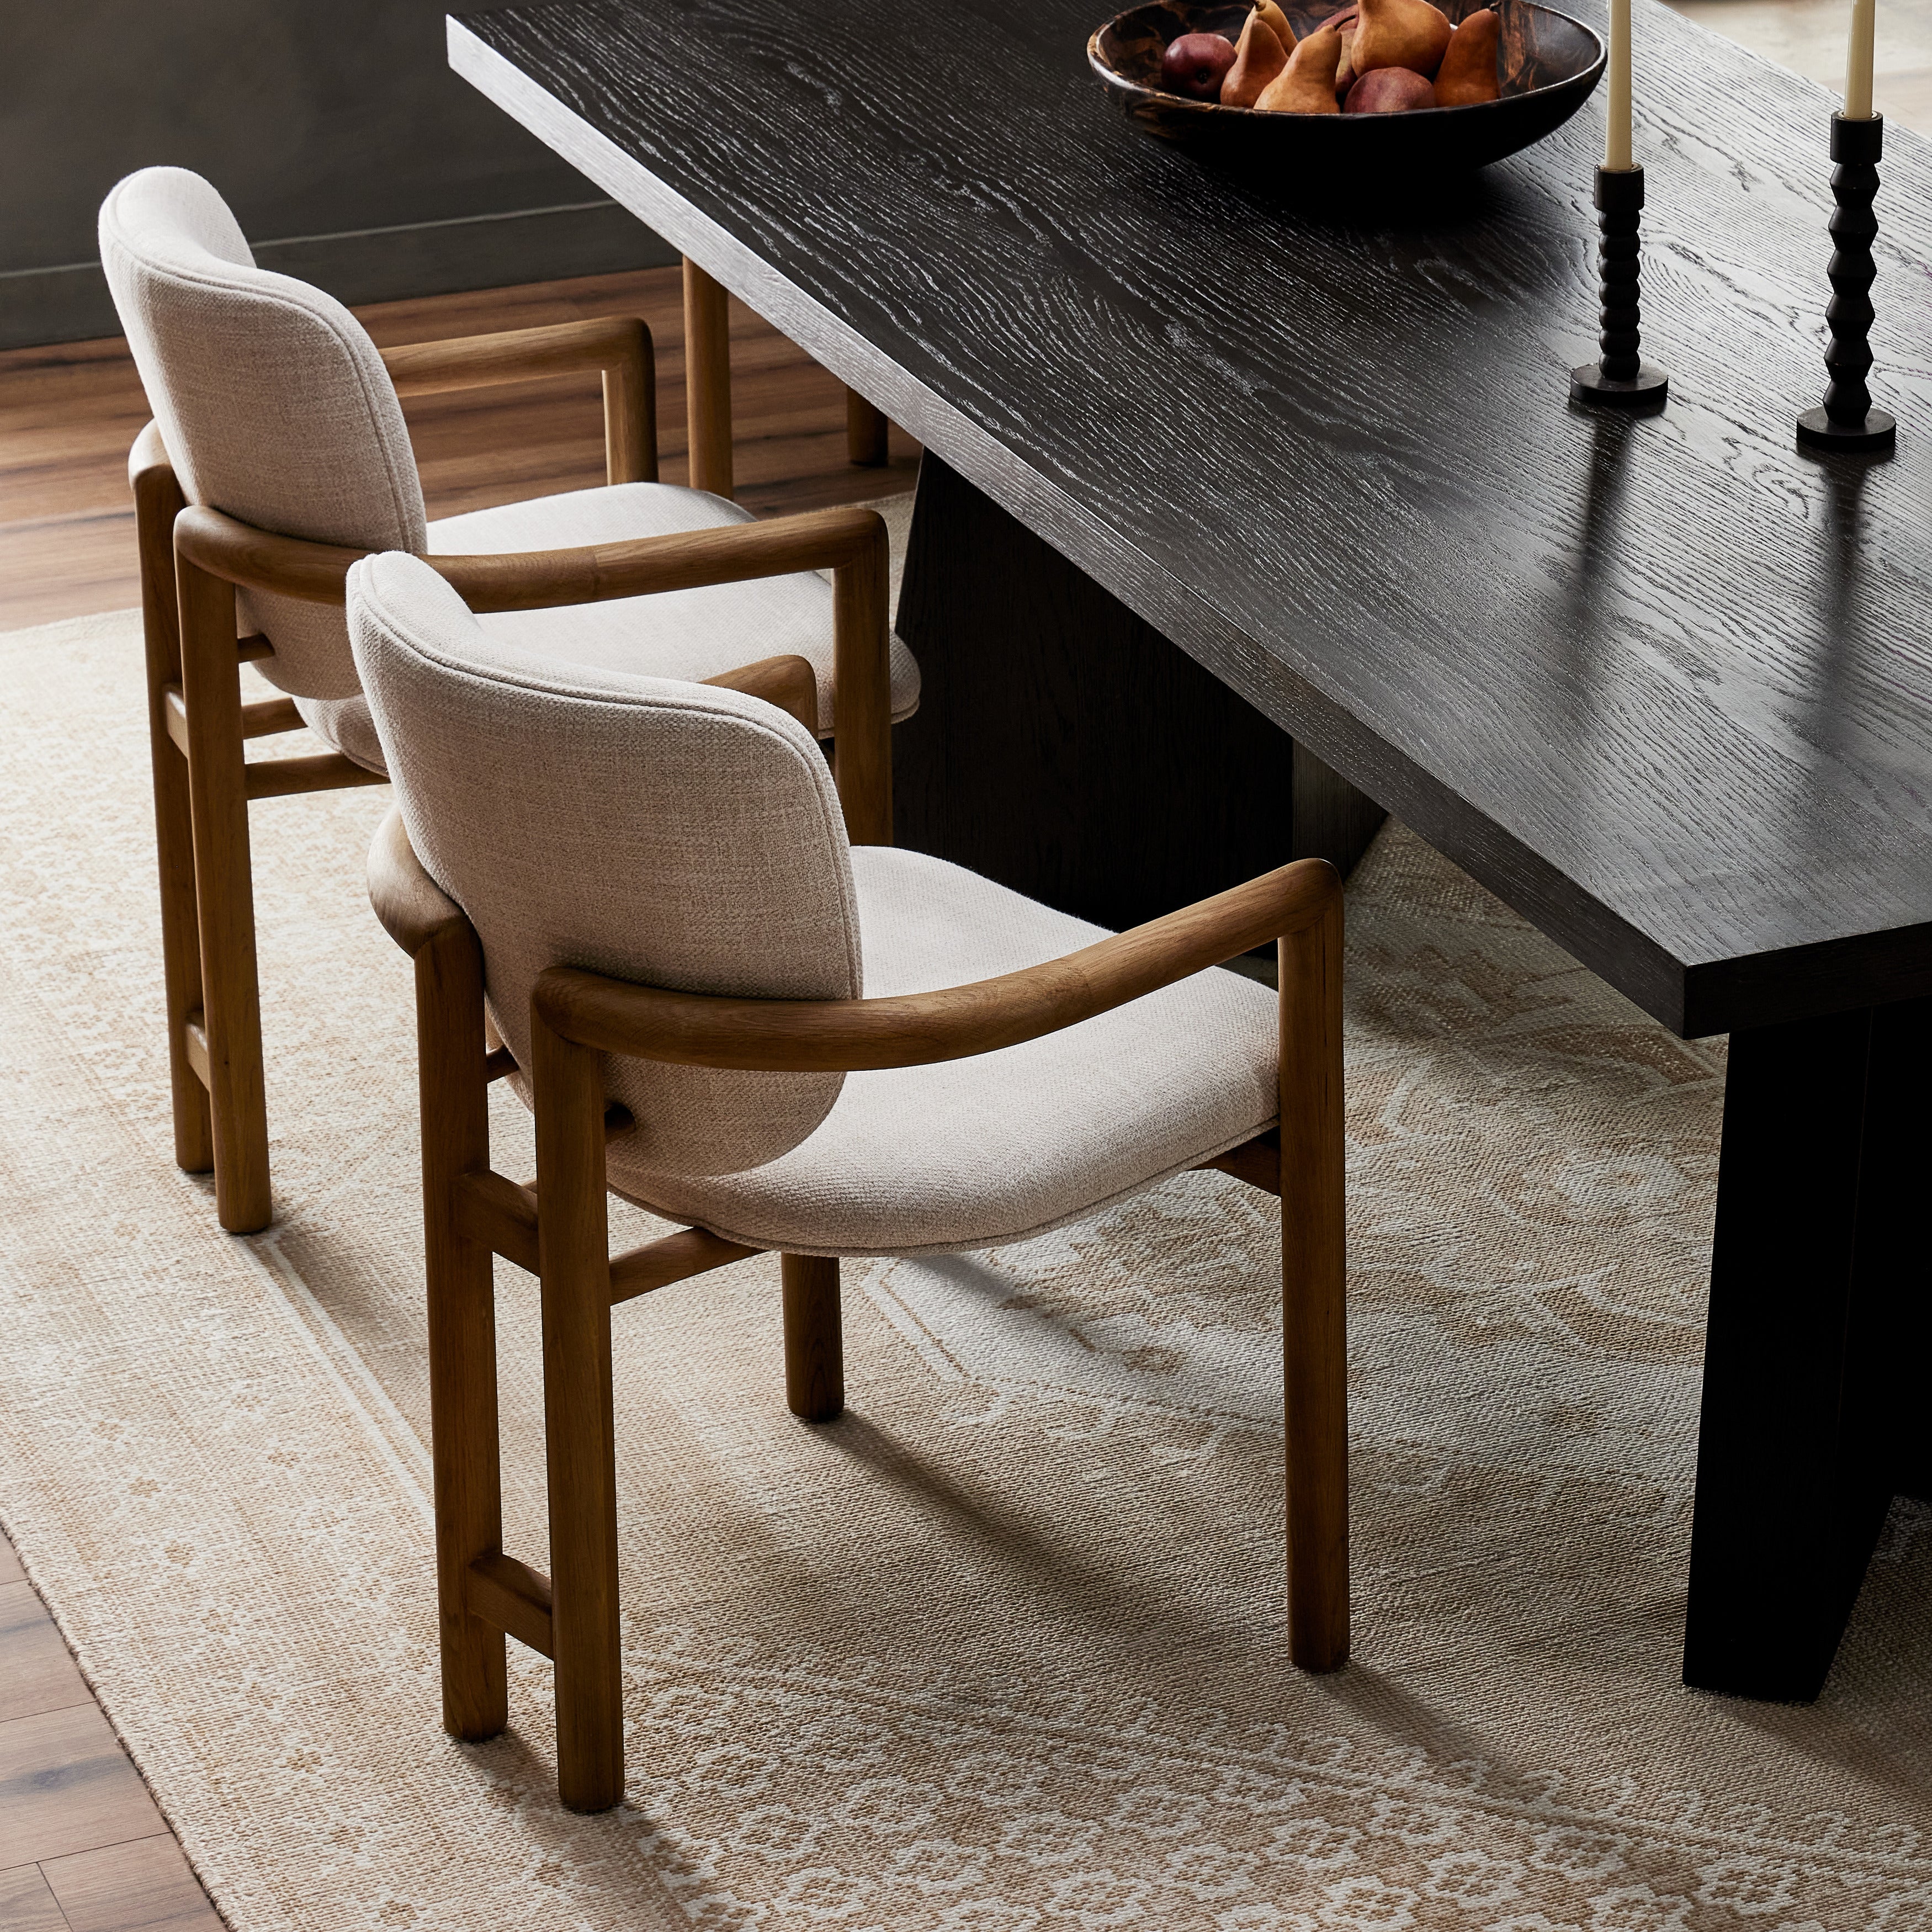 A three-leg format dining chair, streamlining a traditional shape with a touch of intrigue. Tubular framework pairs with curves and a barrel back, bringing a softness to the overall look and design. Amethyst Home provides interior design, new construction, custom furniture, and area rugs in the Nashville metro area.